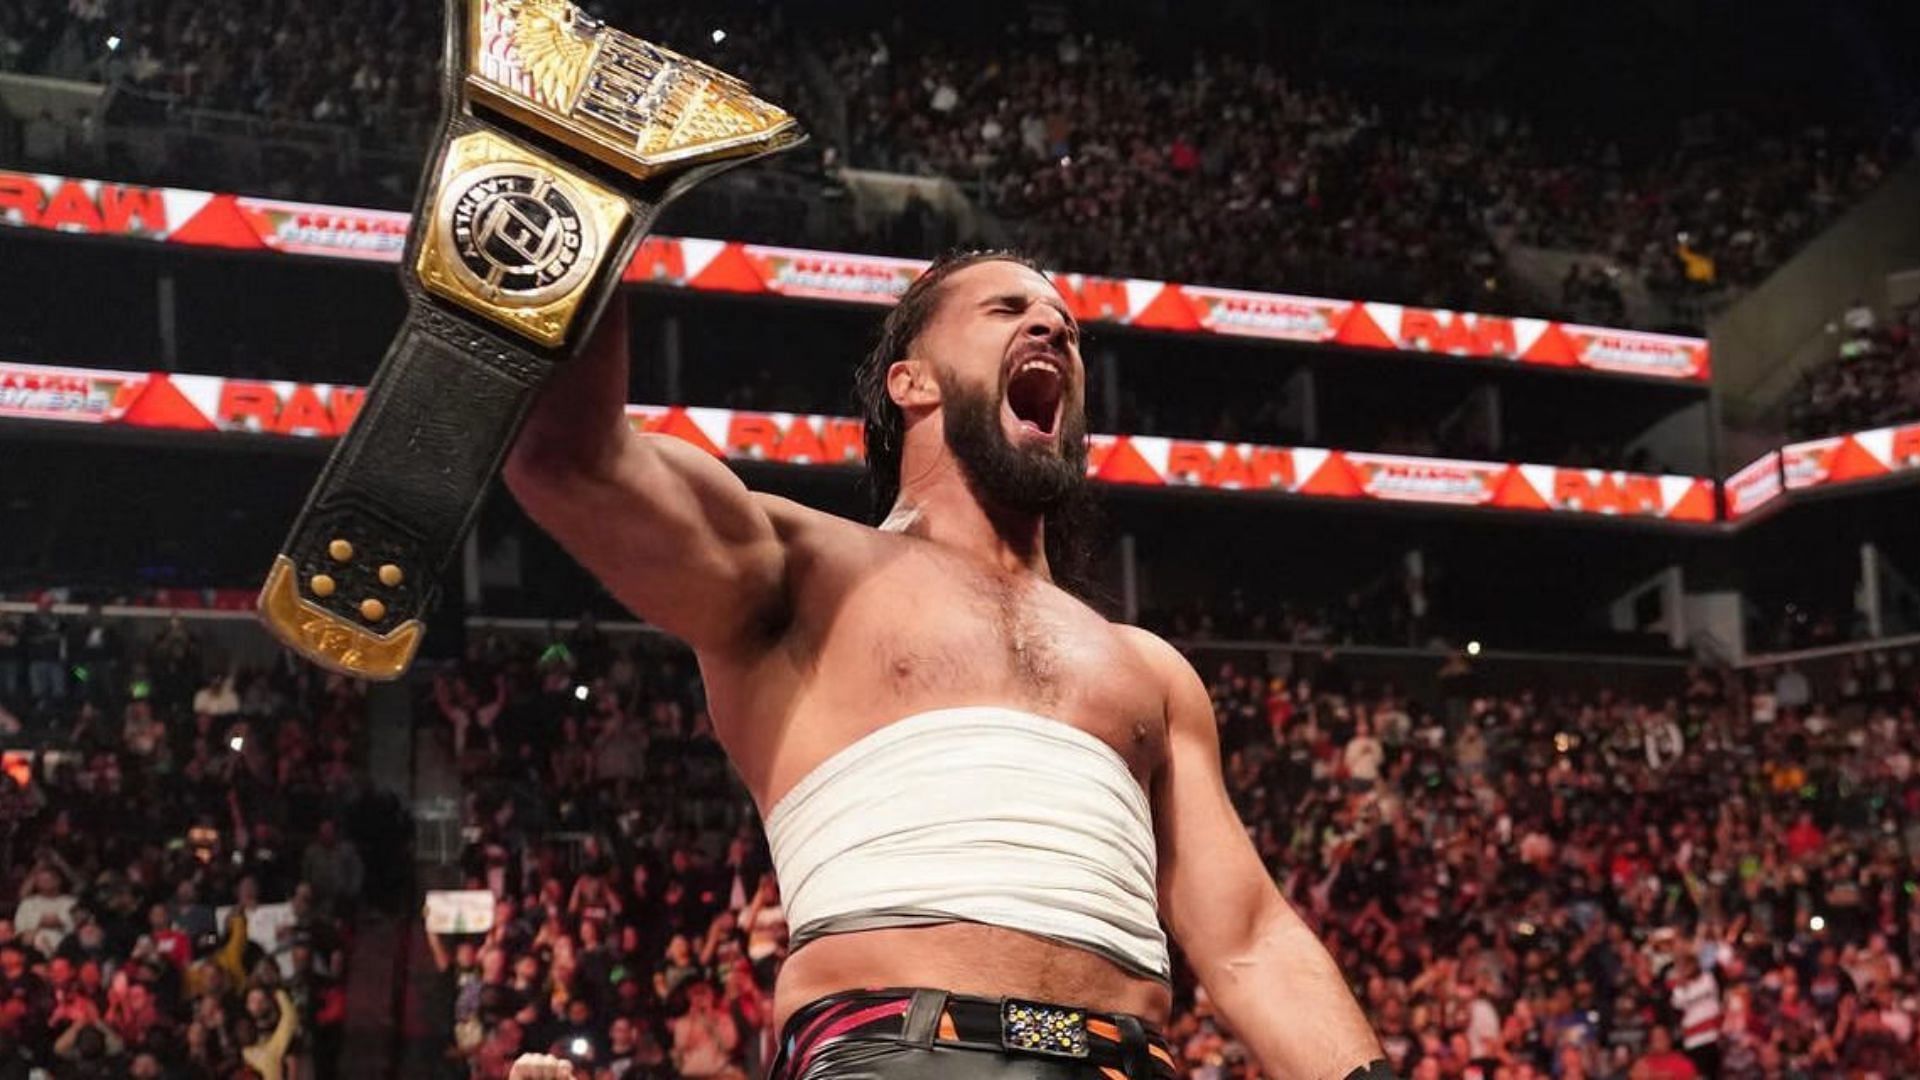 Seth Rollins is the United States Champion